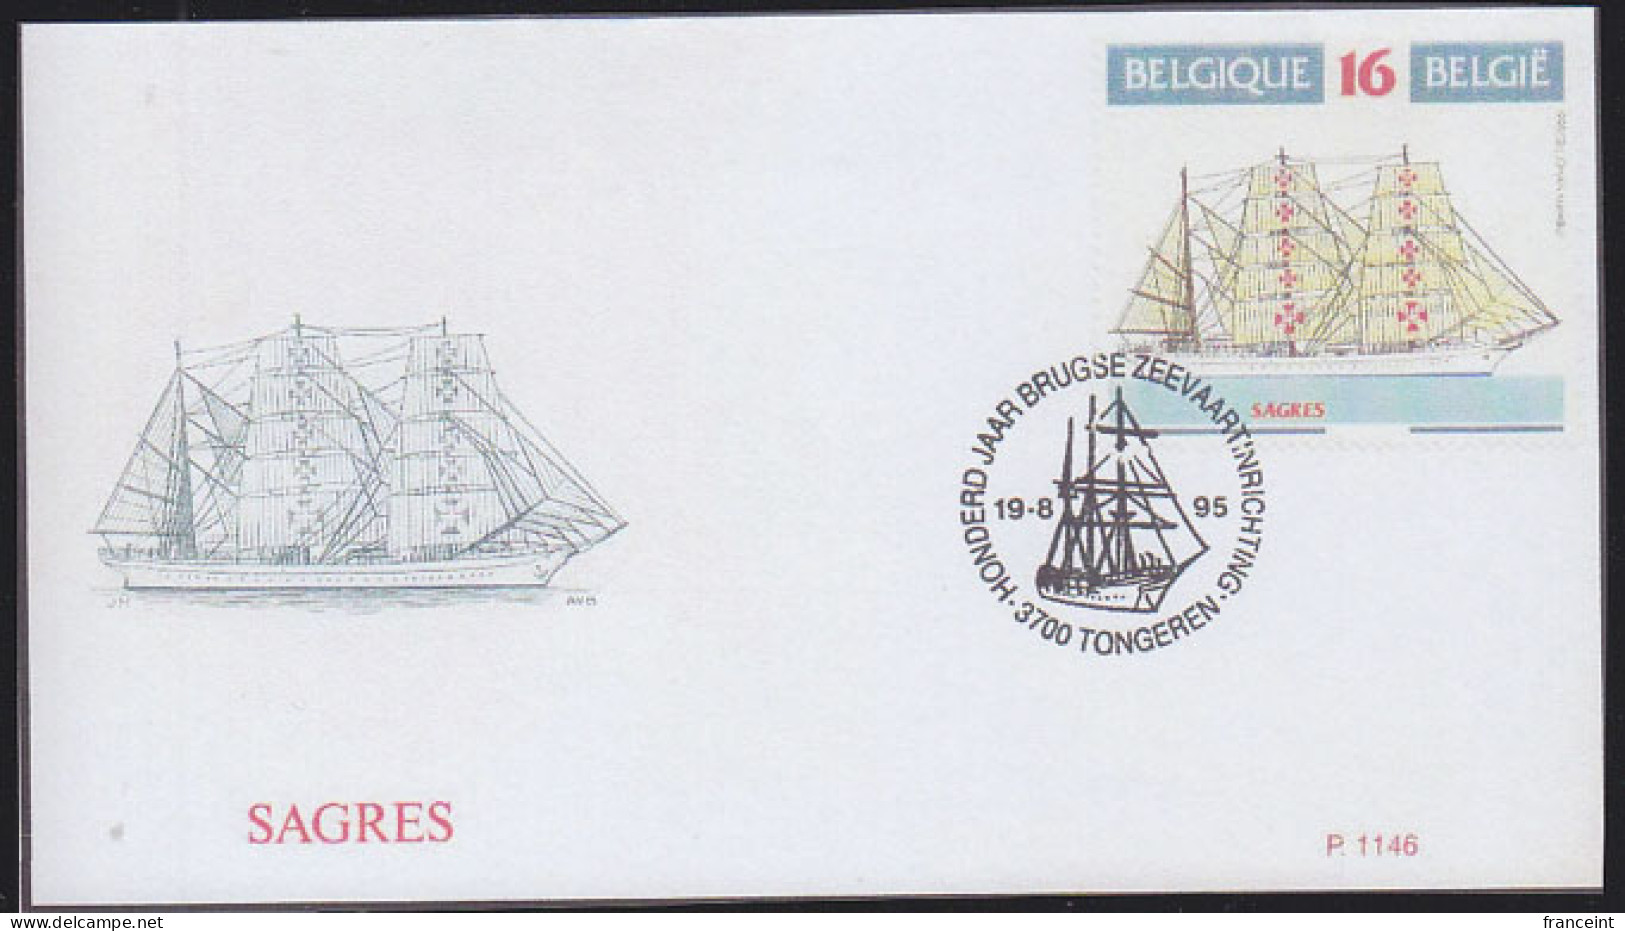 BELGIUM(1992) Sailing Ship Sagres. Die Proof In Green Signed By The Engraver, Representing The FDC Cachet. Scott No 1592 - Proofs & Reprints